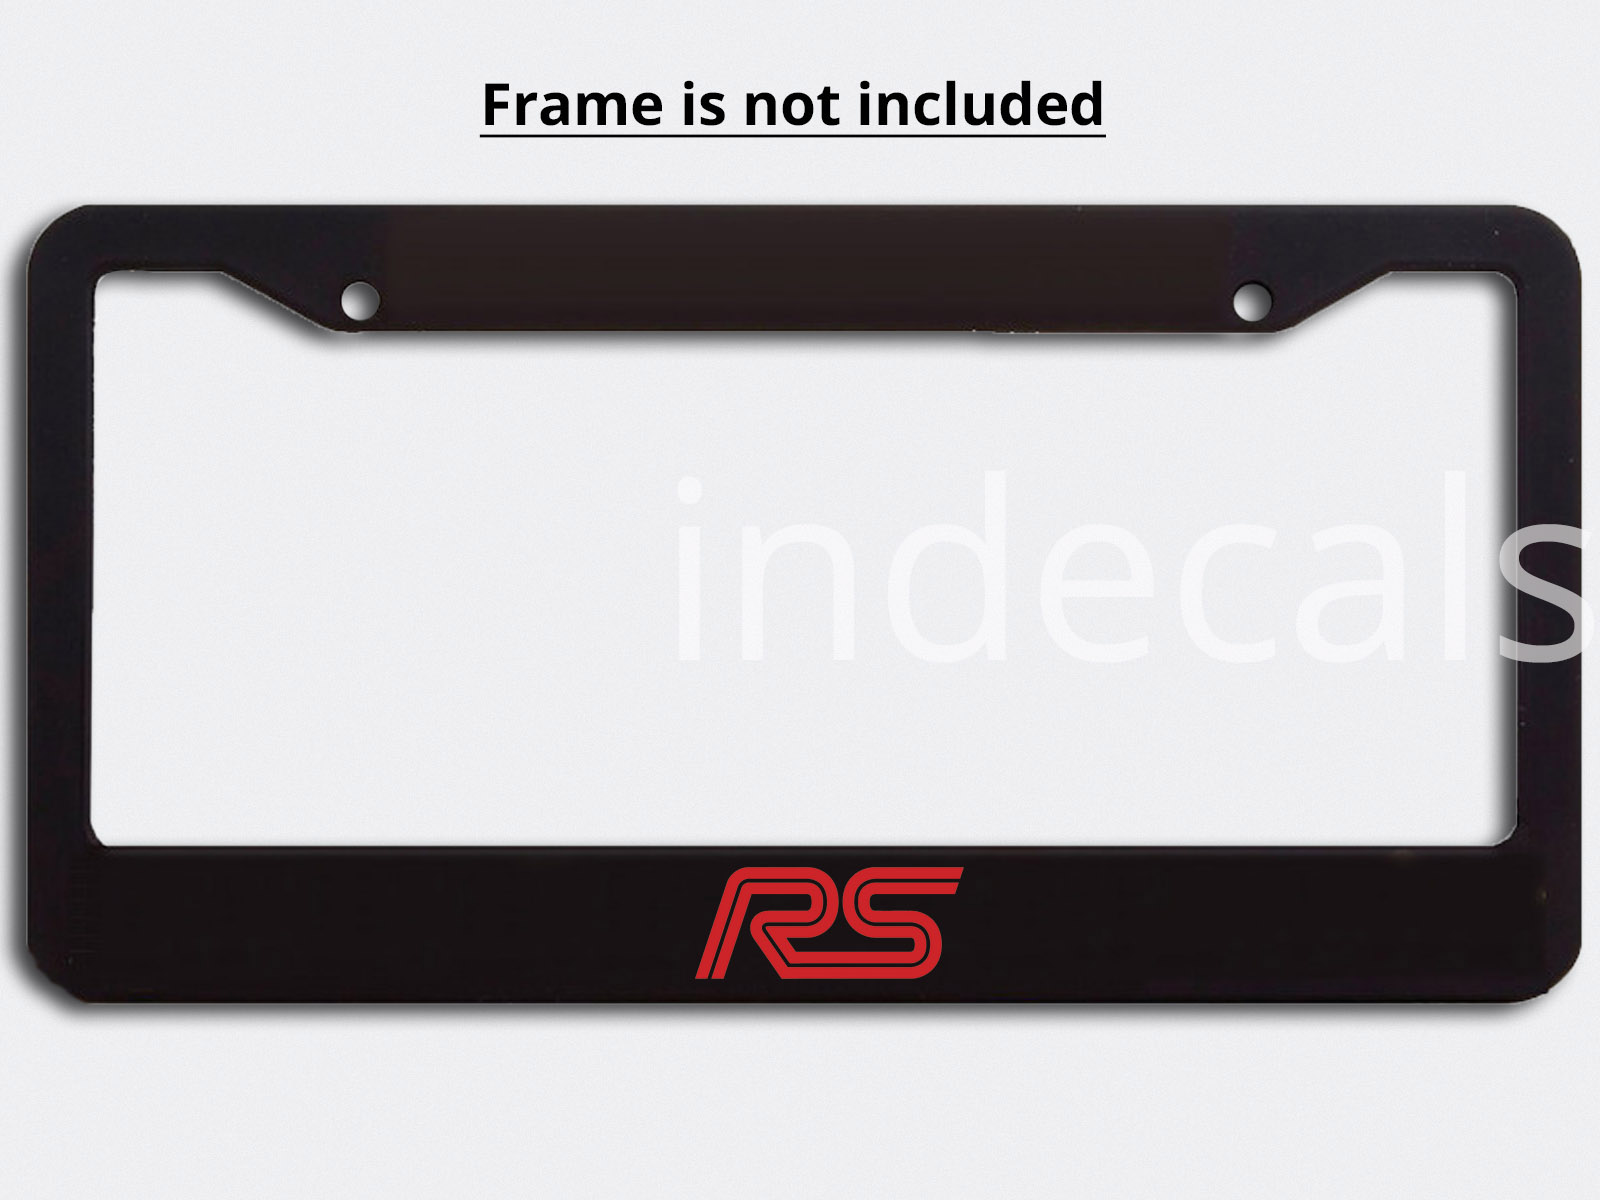 3 x Ford RS Stickers for License Plate Frame - Red